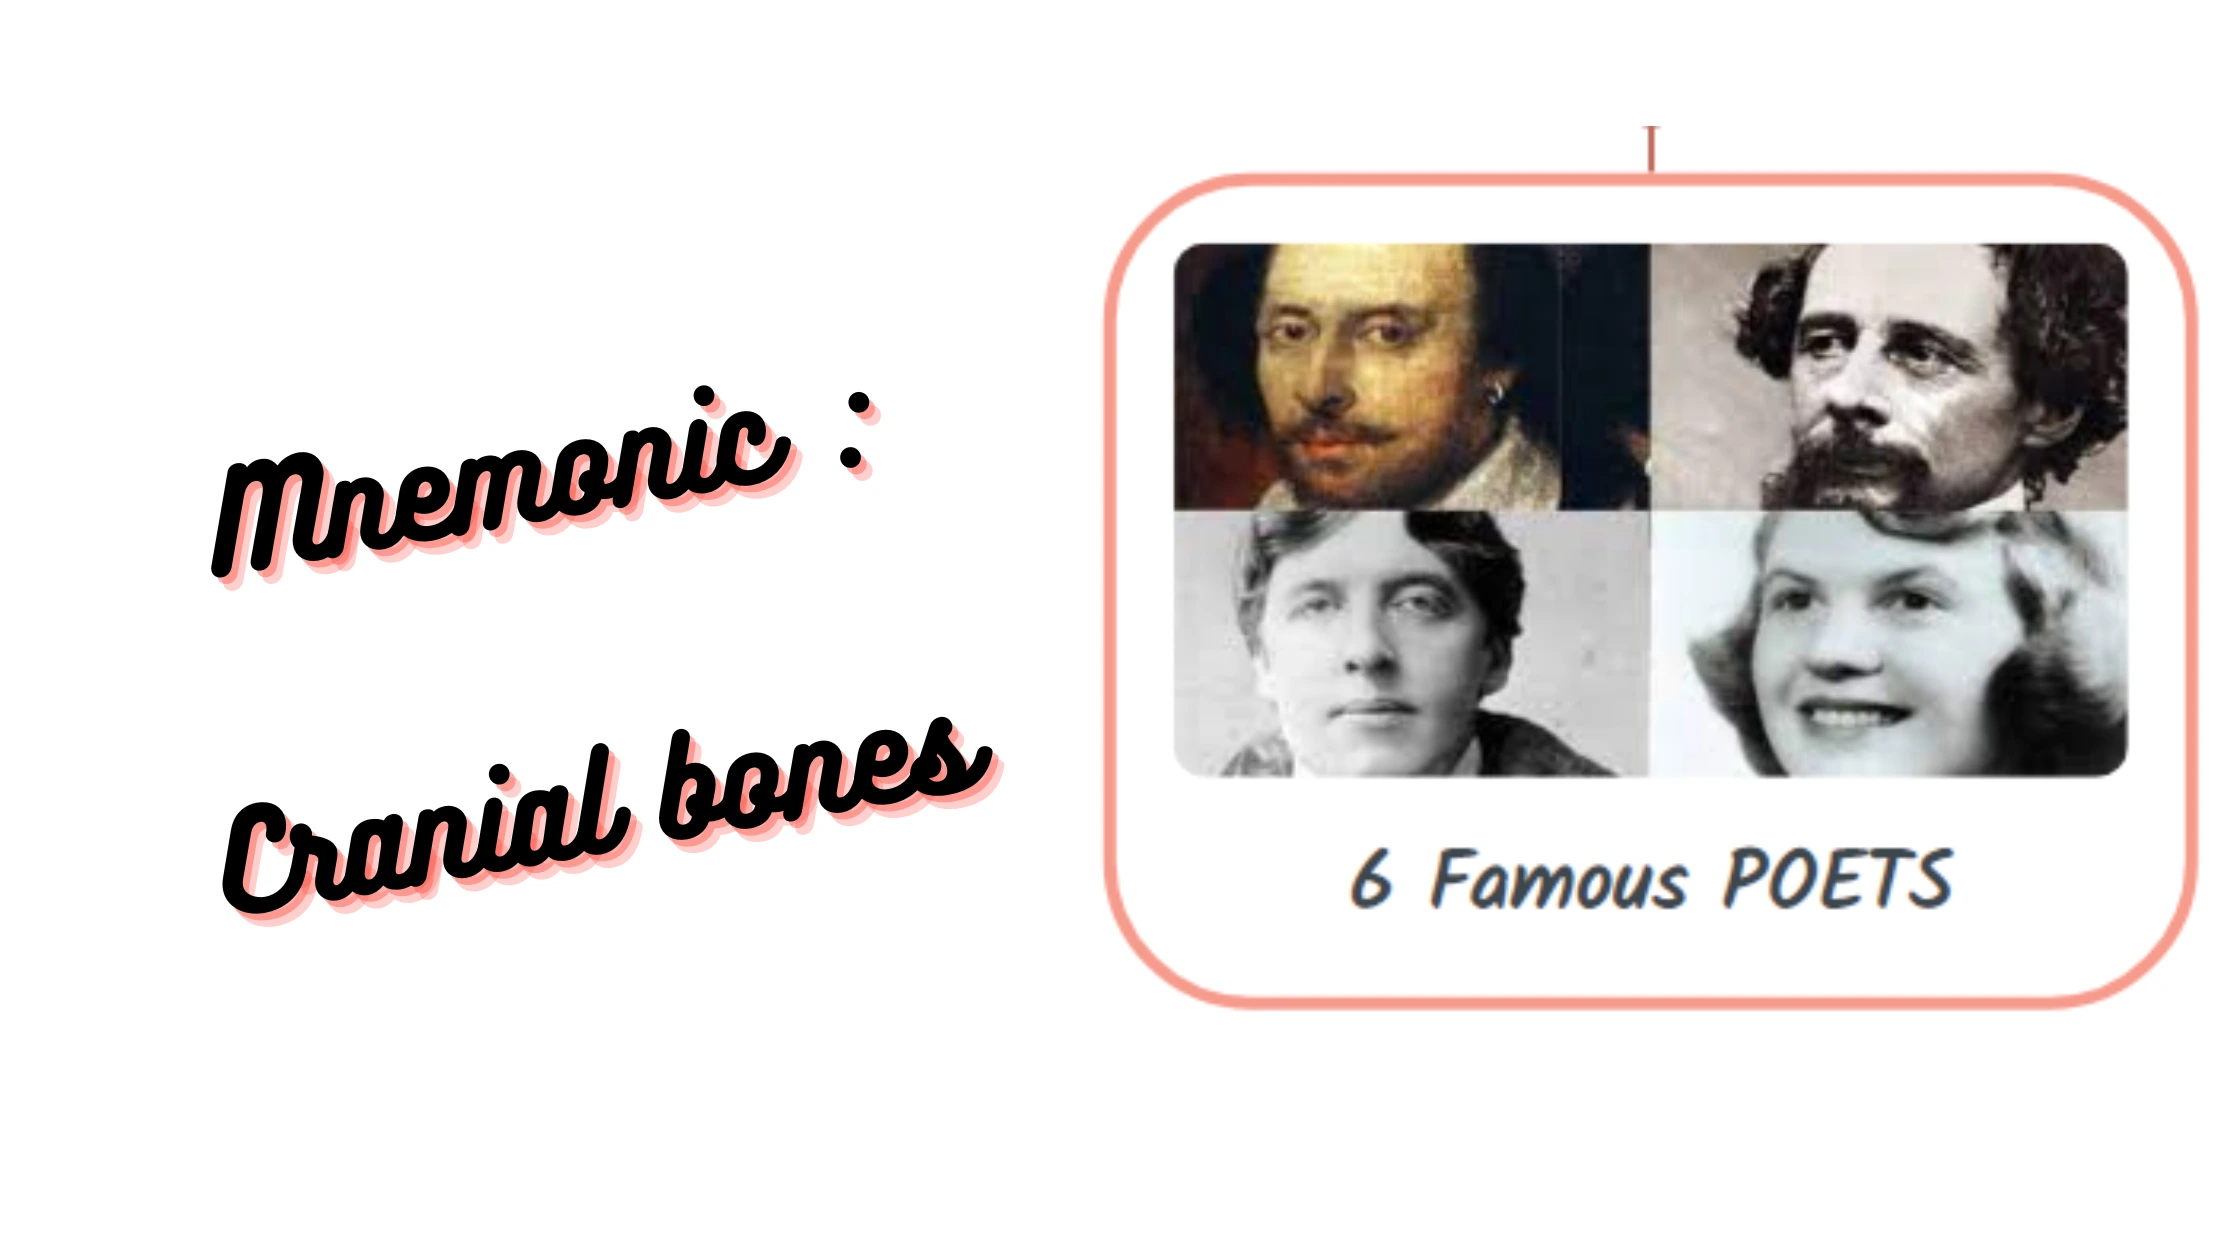 You are currently viewing Mnemonic : Cranial bones